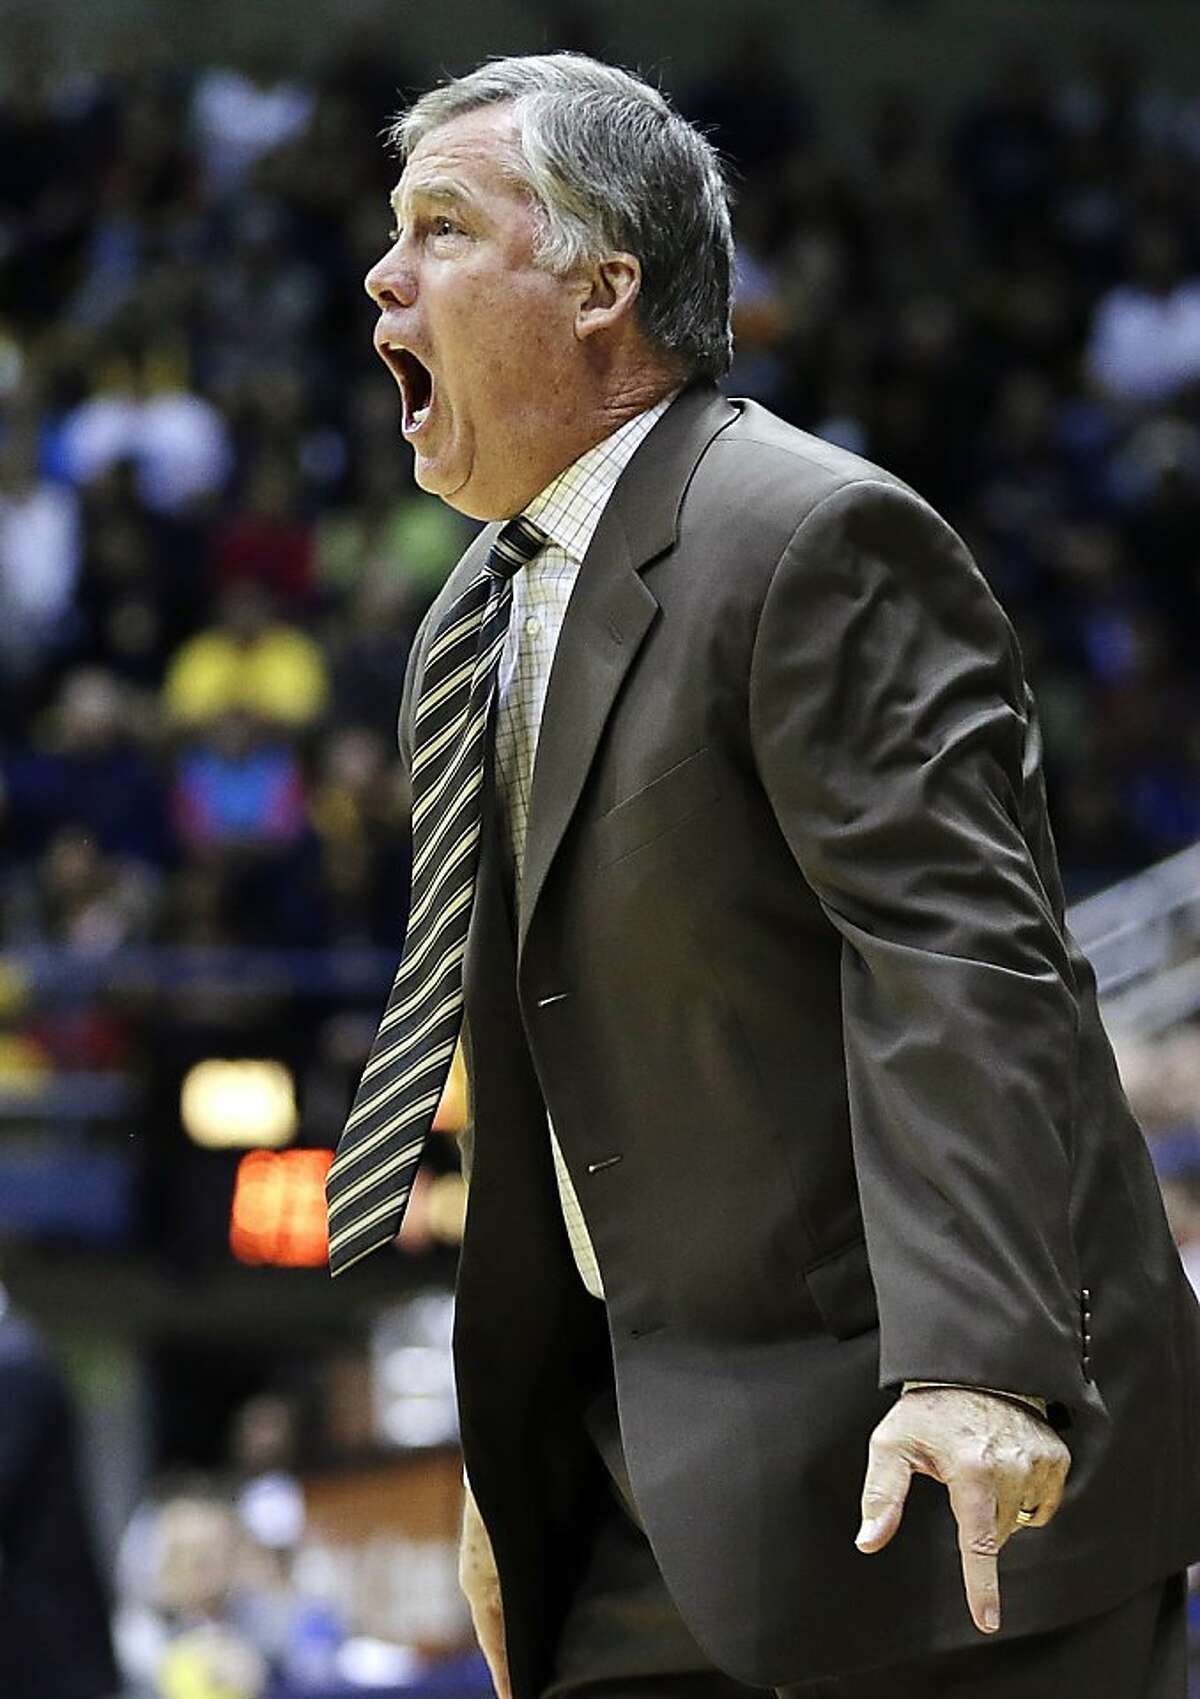 California head coach Mike Montgomery yells from the sidelines during the first half of an NCAA college basketball game against Southern California, Sunday, Feb. 17, 2013, in Berkeley, Calif. (AP Photo/Ben Margot)